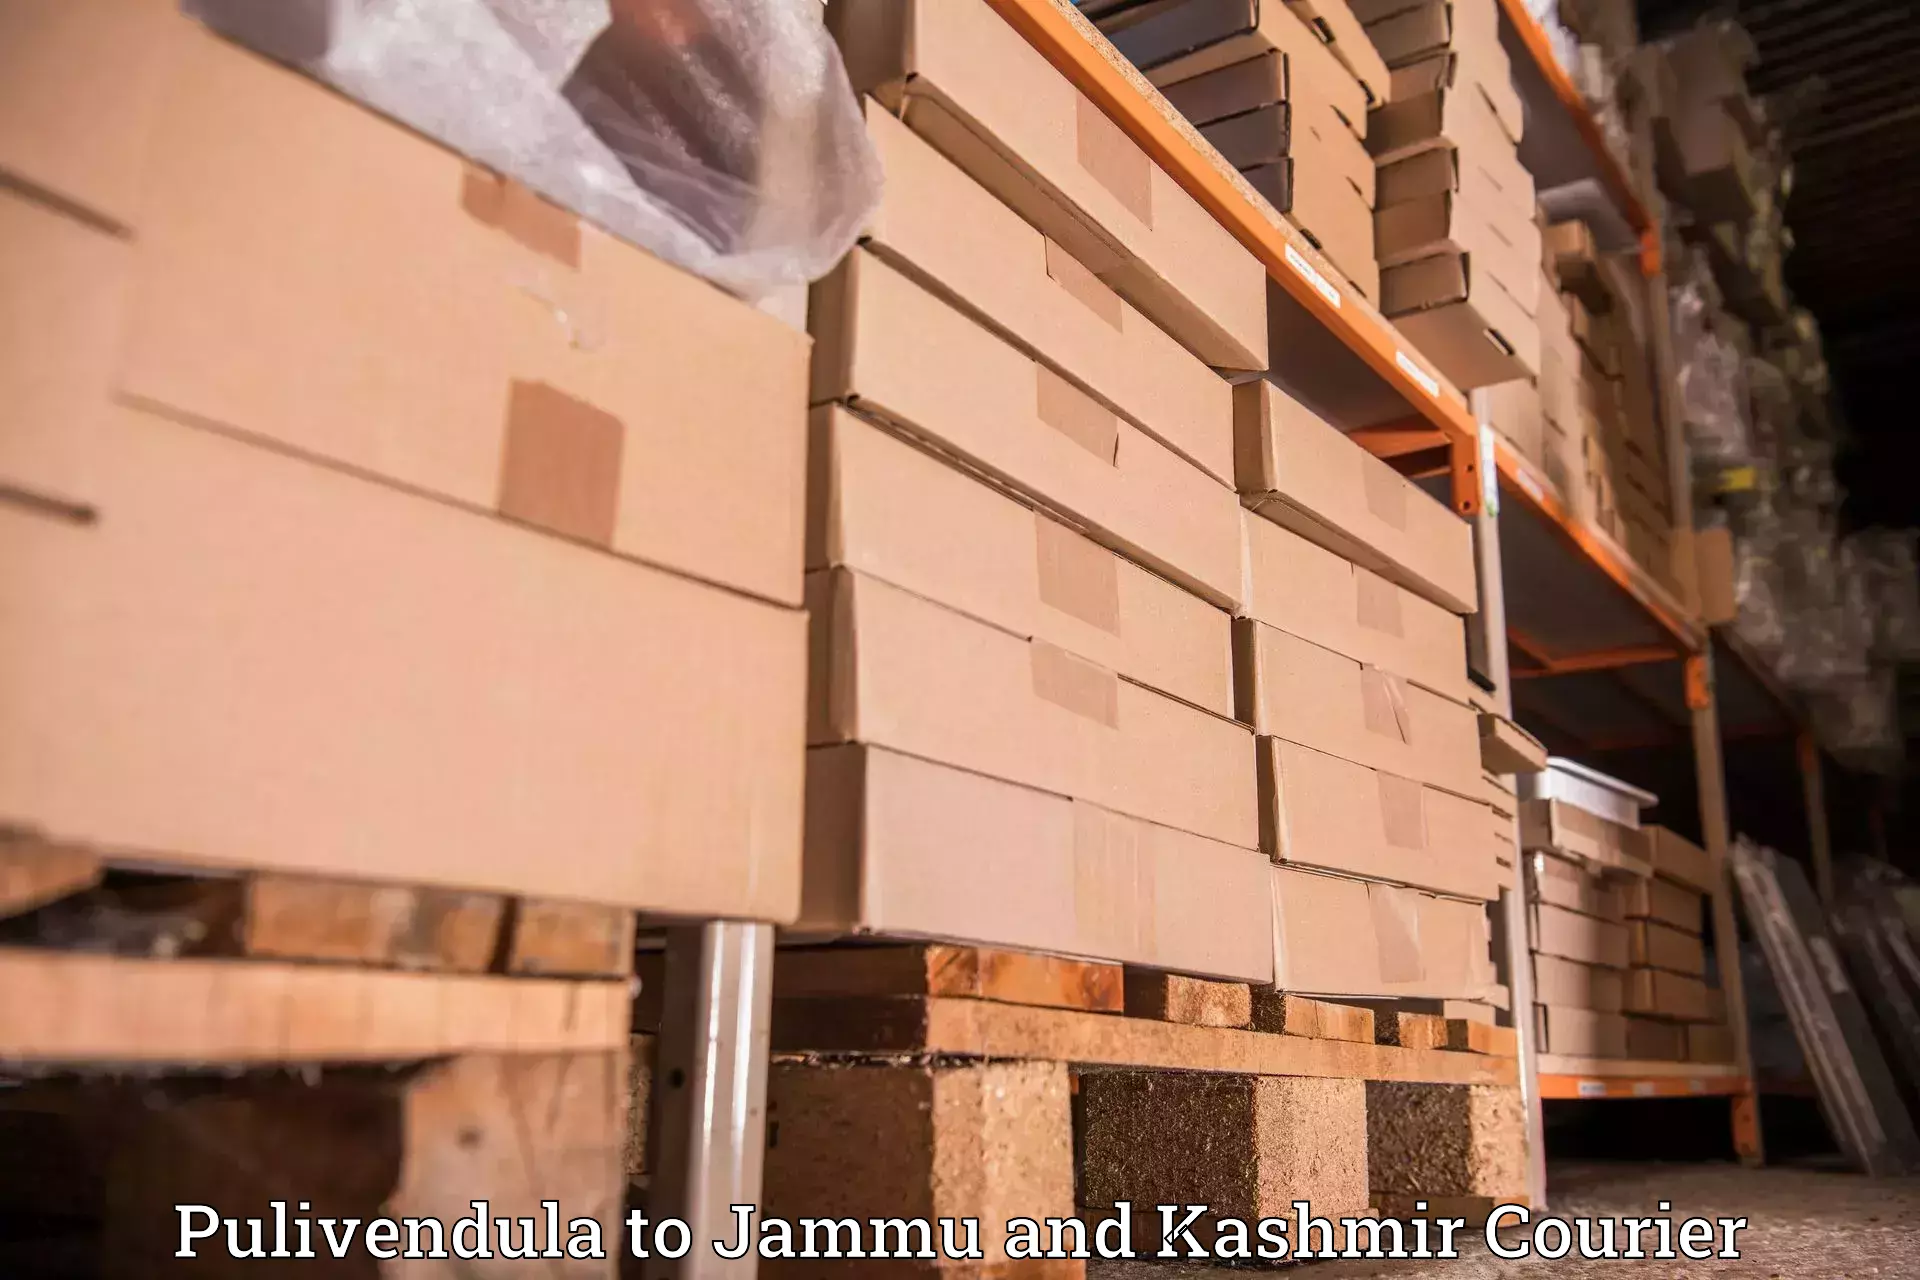 Logistics and distribution in Pulivendula to Anantnag